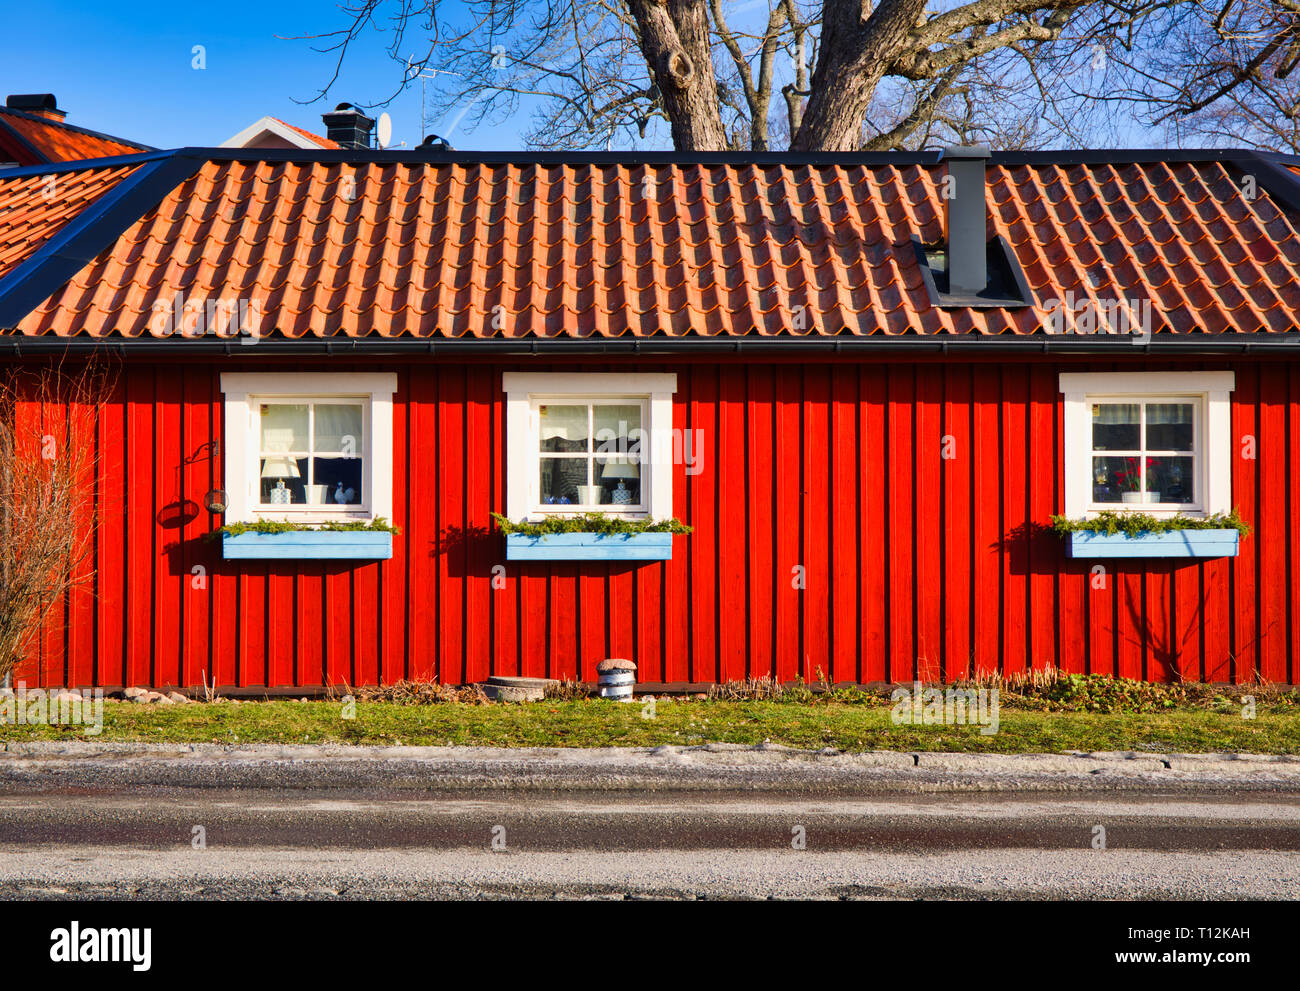 Traditional Falun red cottage, Sigtuna, Sweden. Falun or Falu red is a dye used in red paint traditionally for cottages and barns in Scandinavia Stock Photo